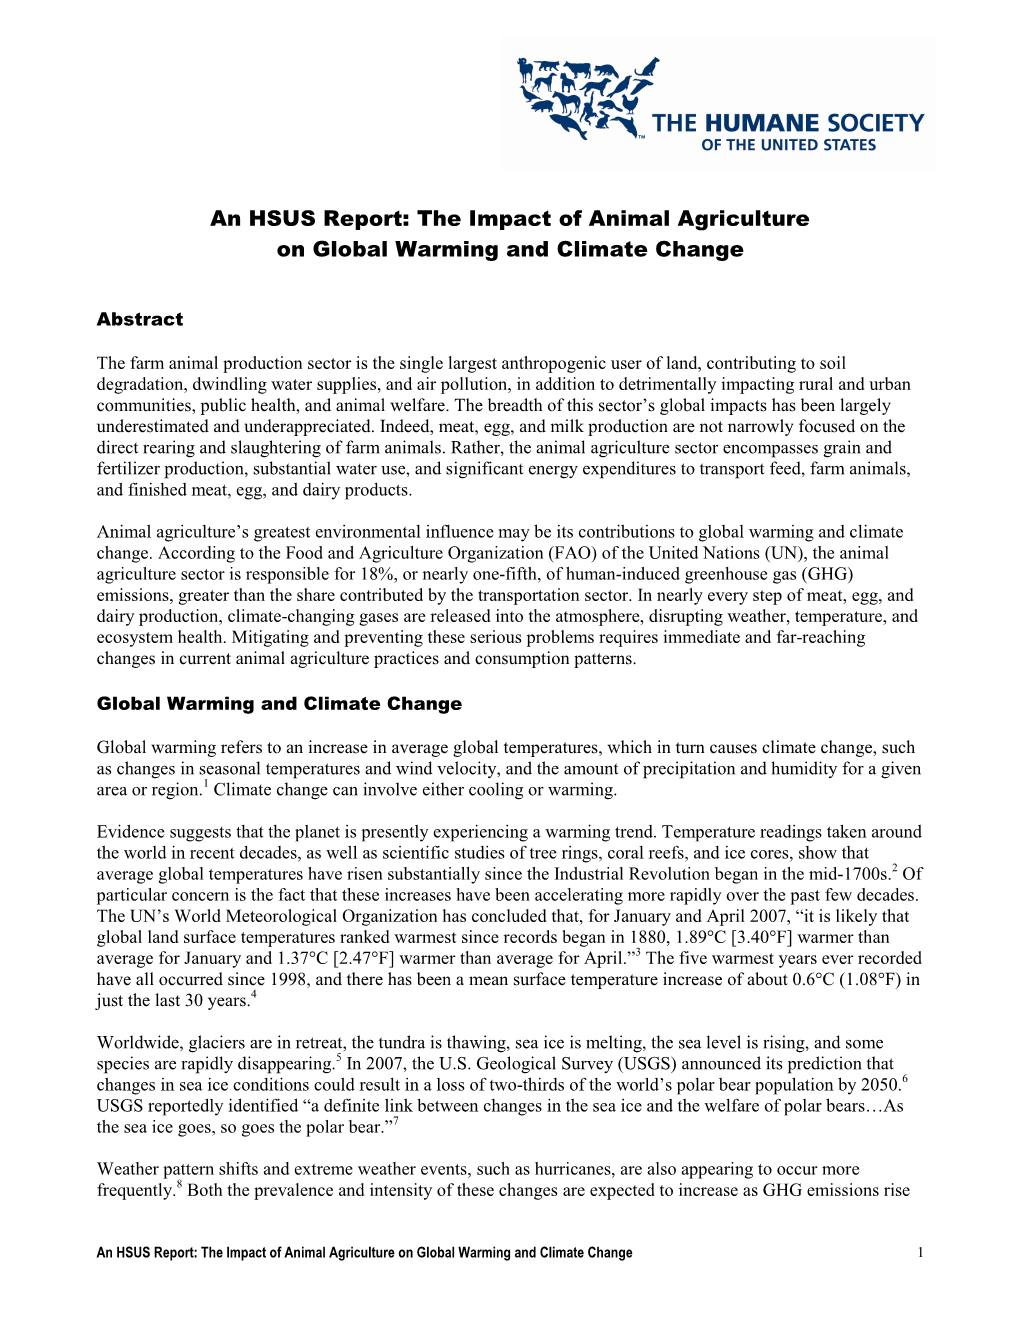 The Impact of Animal Agriculture on Global Warming and Climate Change